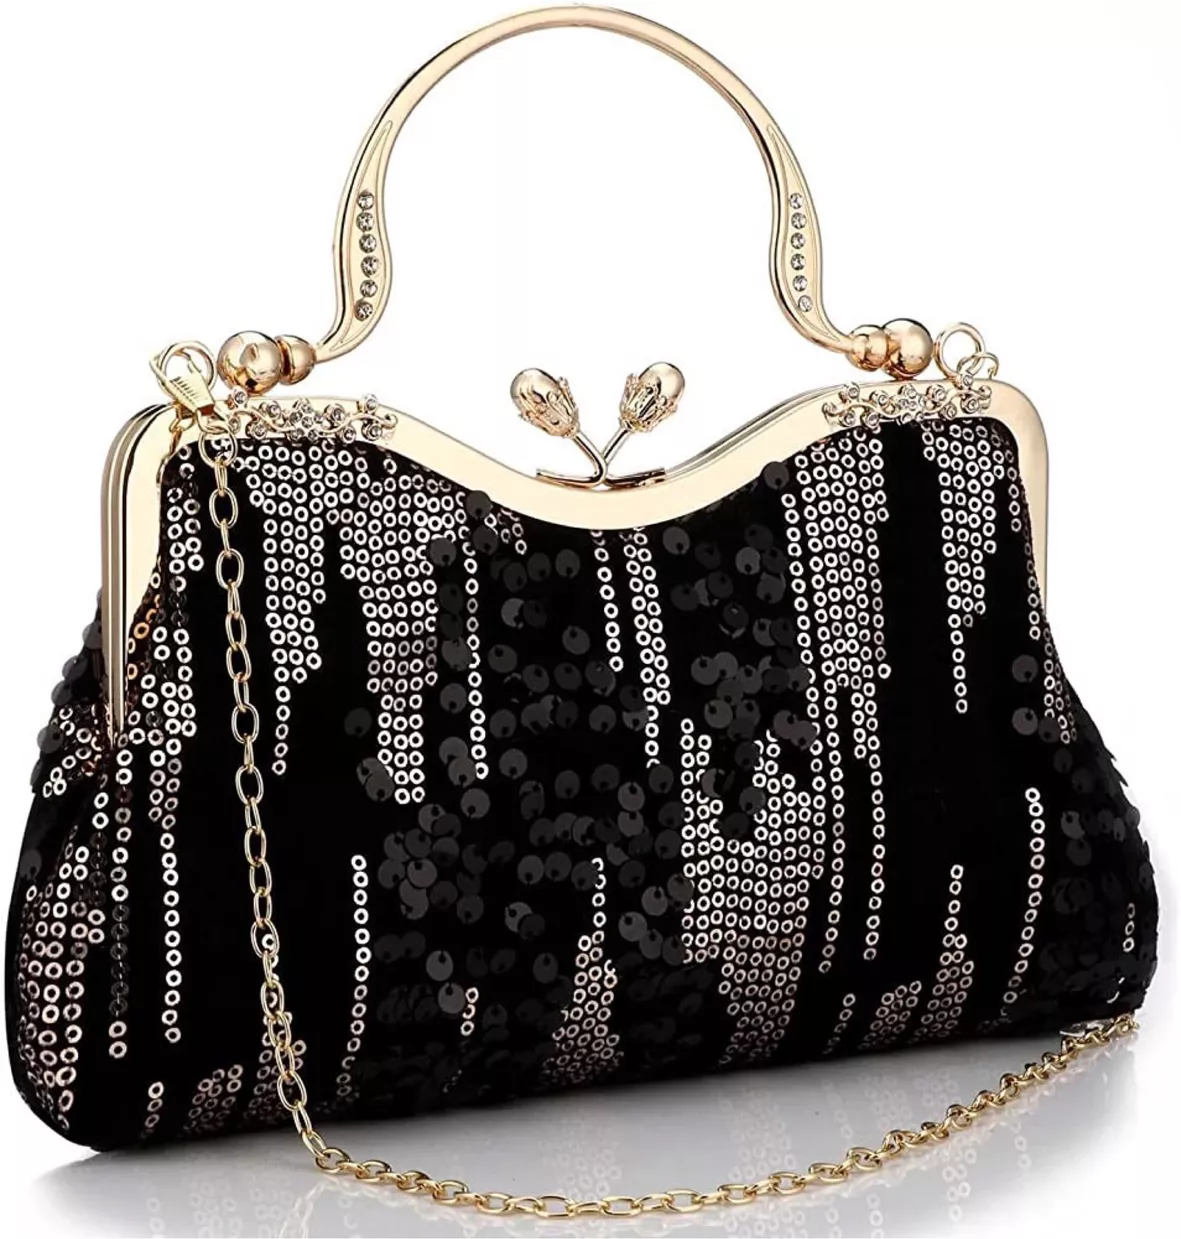 Selighting 1920s Vintage Beaded Clutch Evening Bags For Women Formal Bridal Wedding Clutch Purse Prom Cocktail Party Handbags (Black)